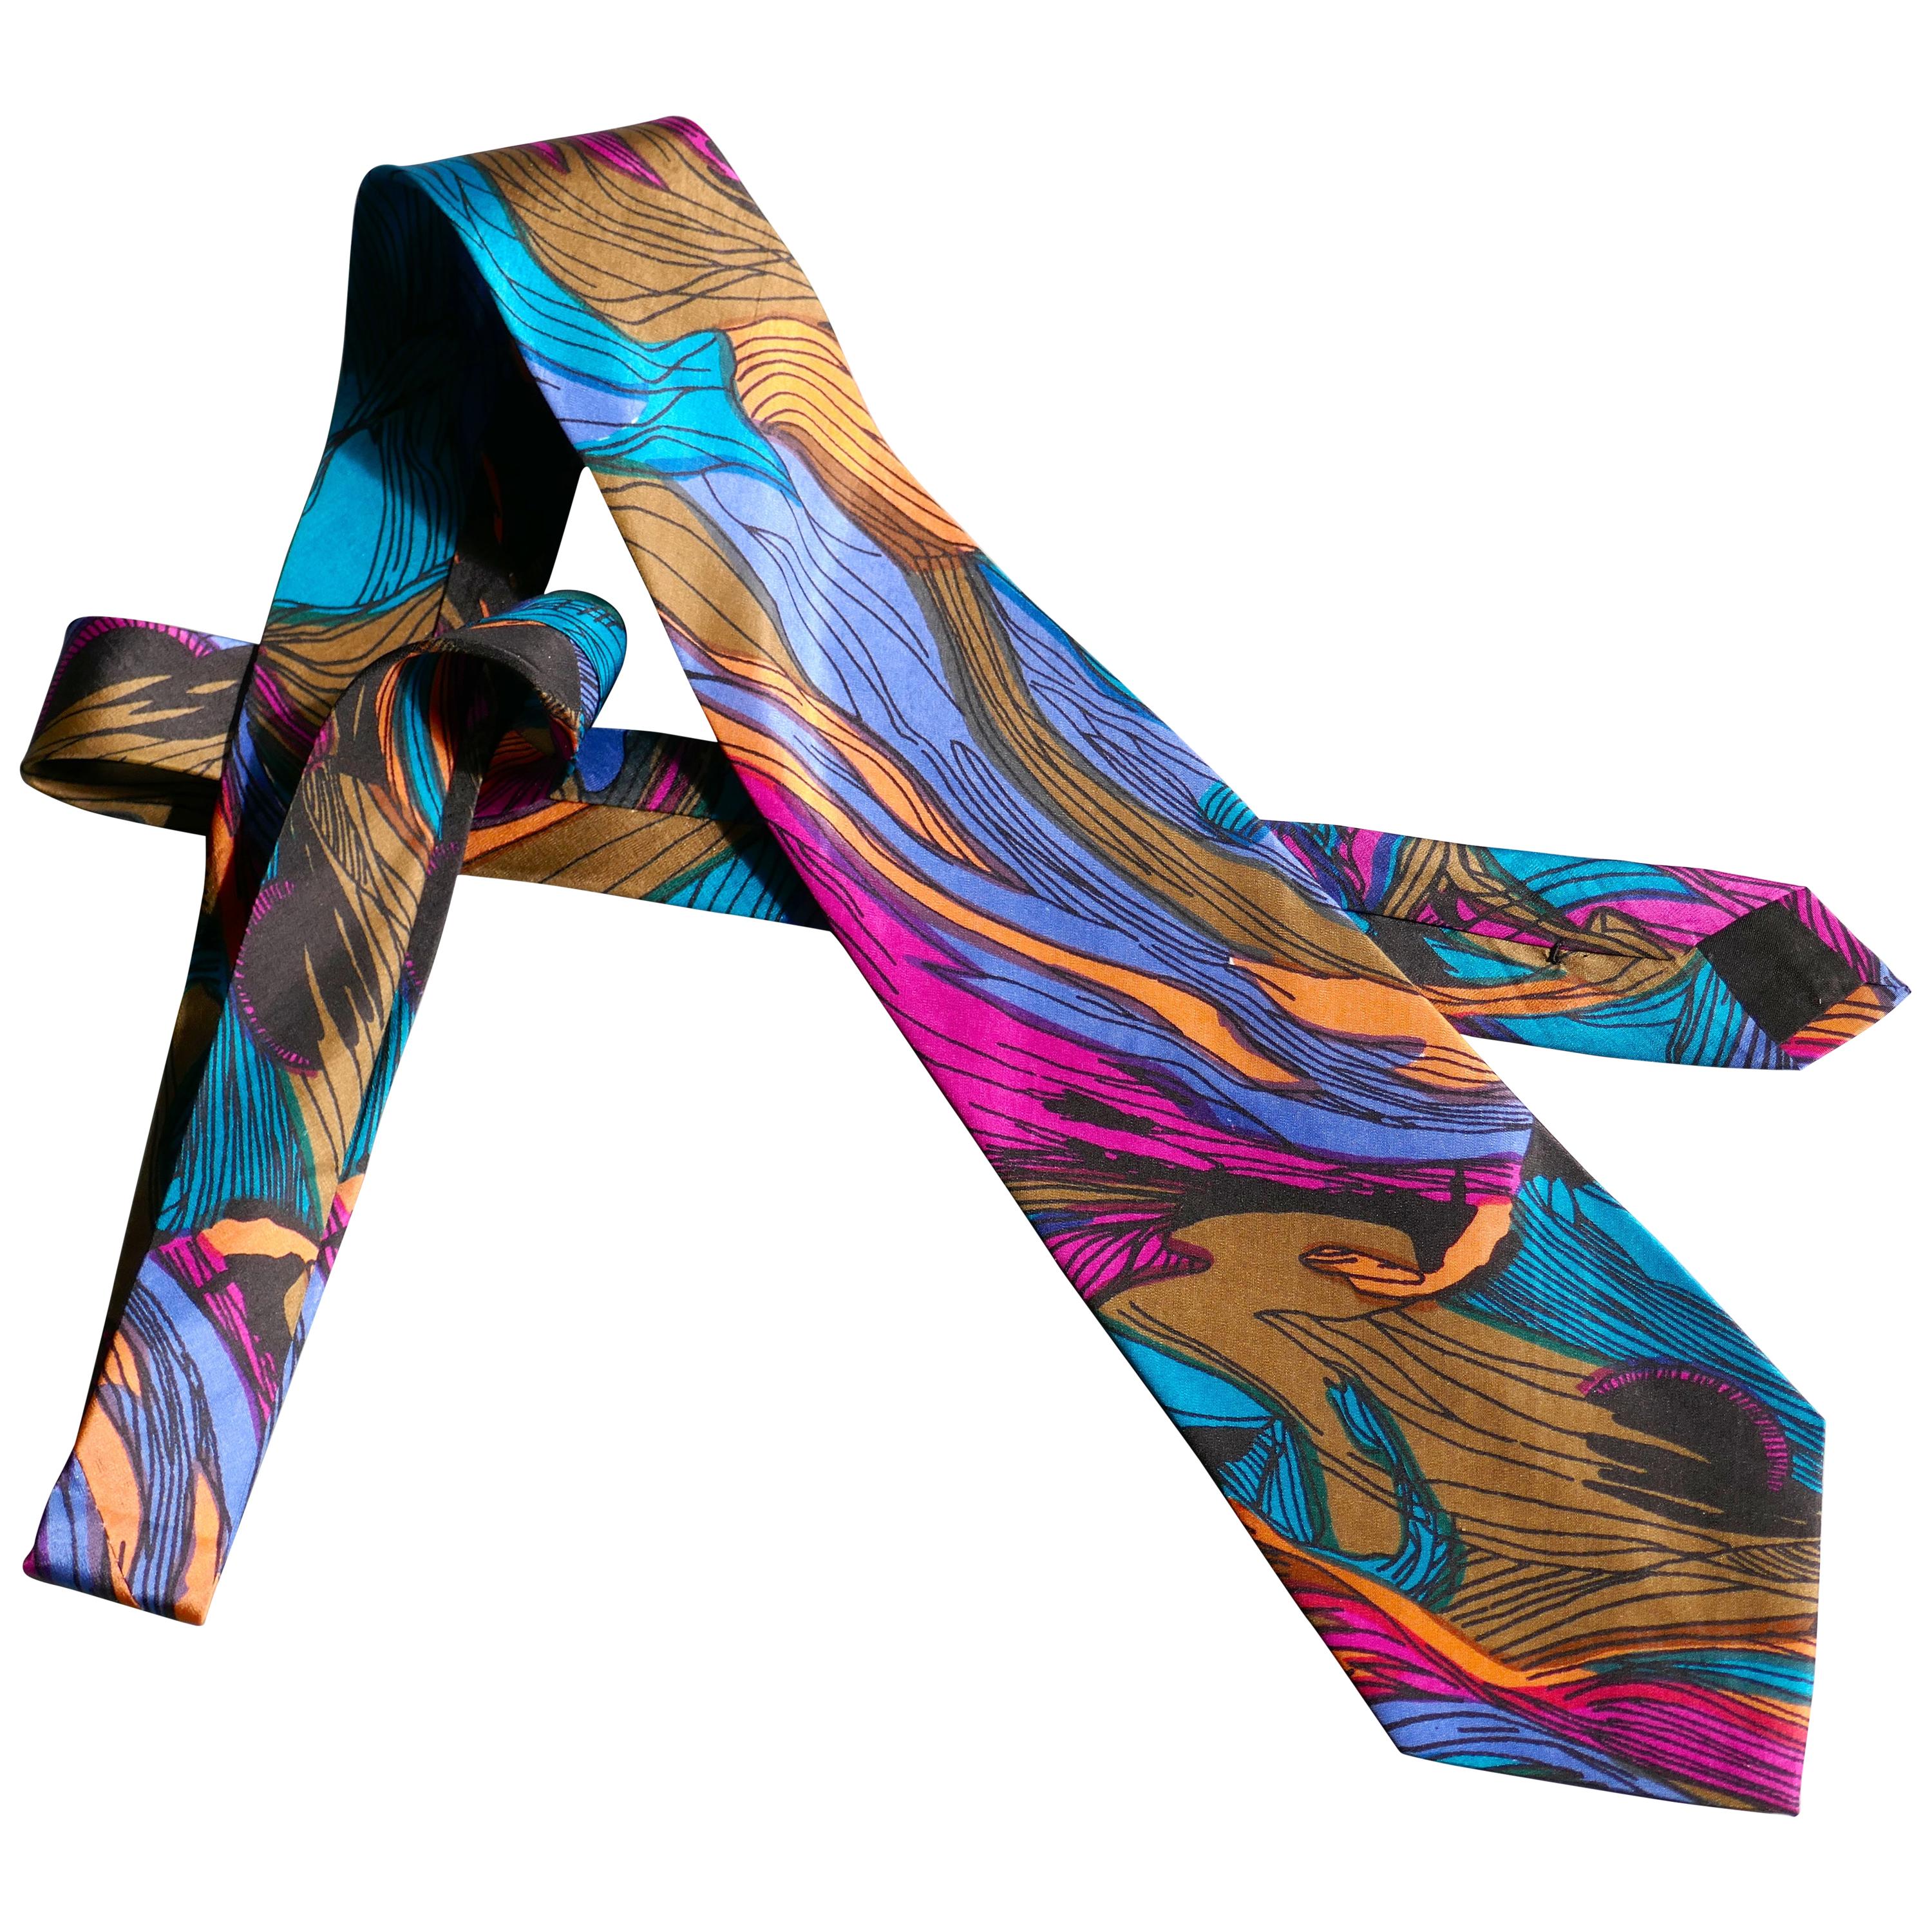 Psychedelic Vintage Retro Silk Tie, Classic from 1960s